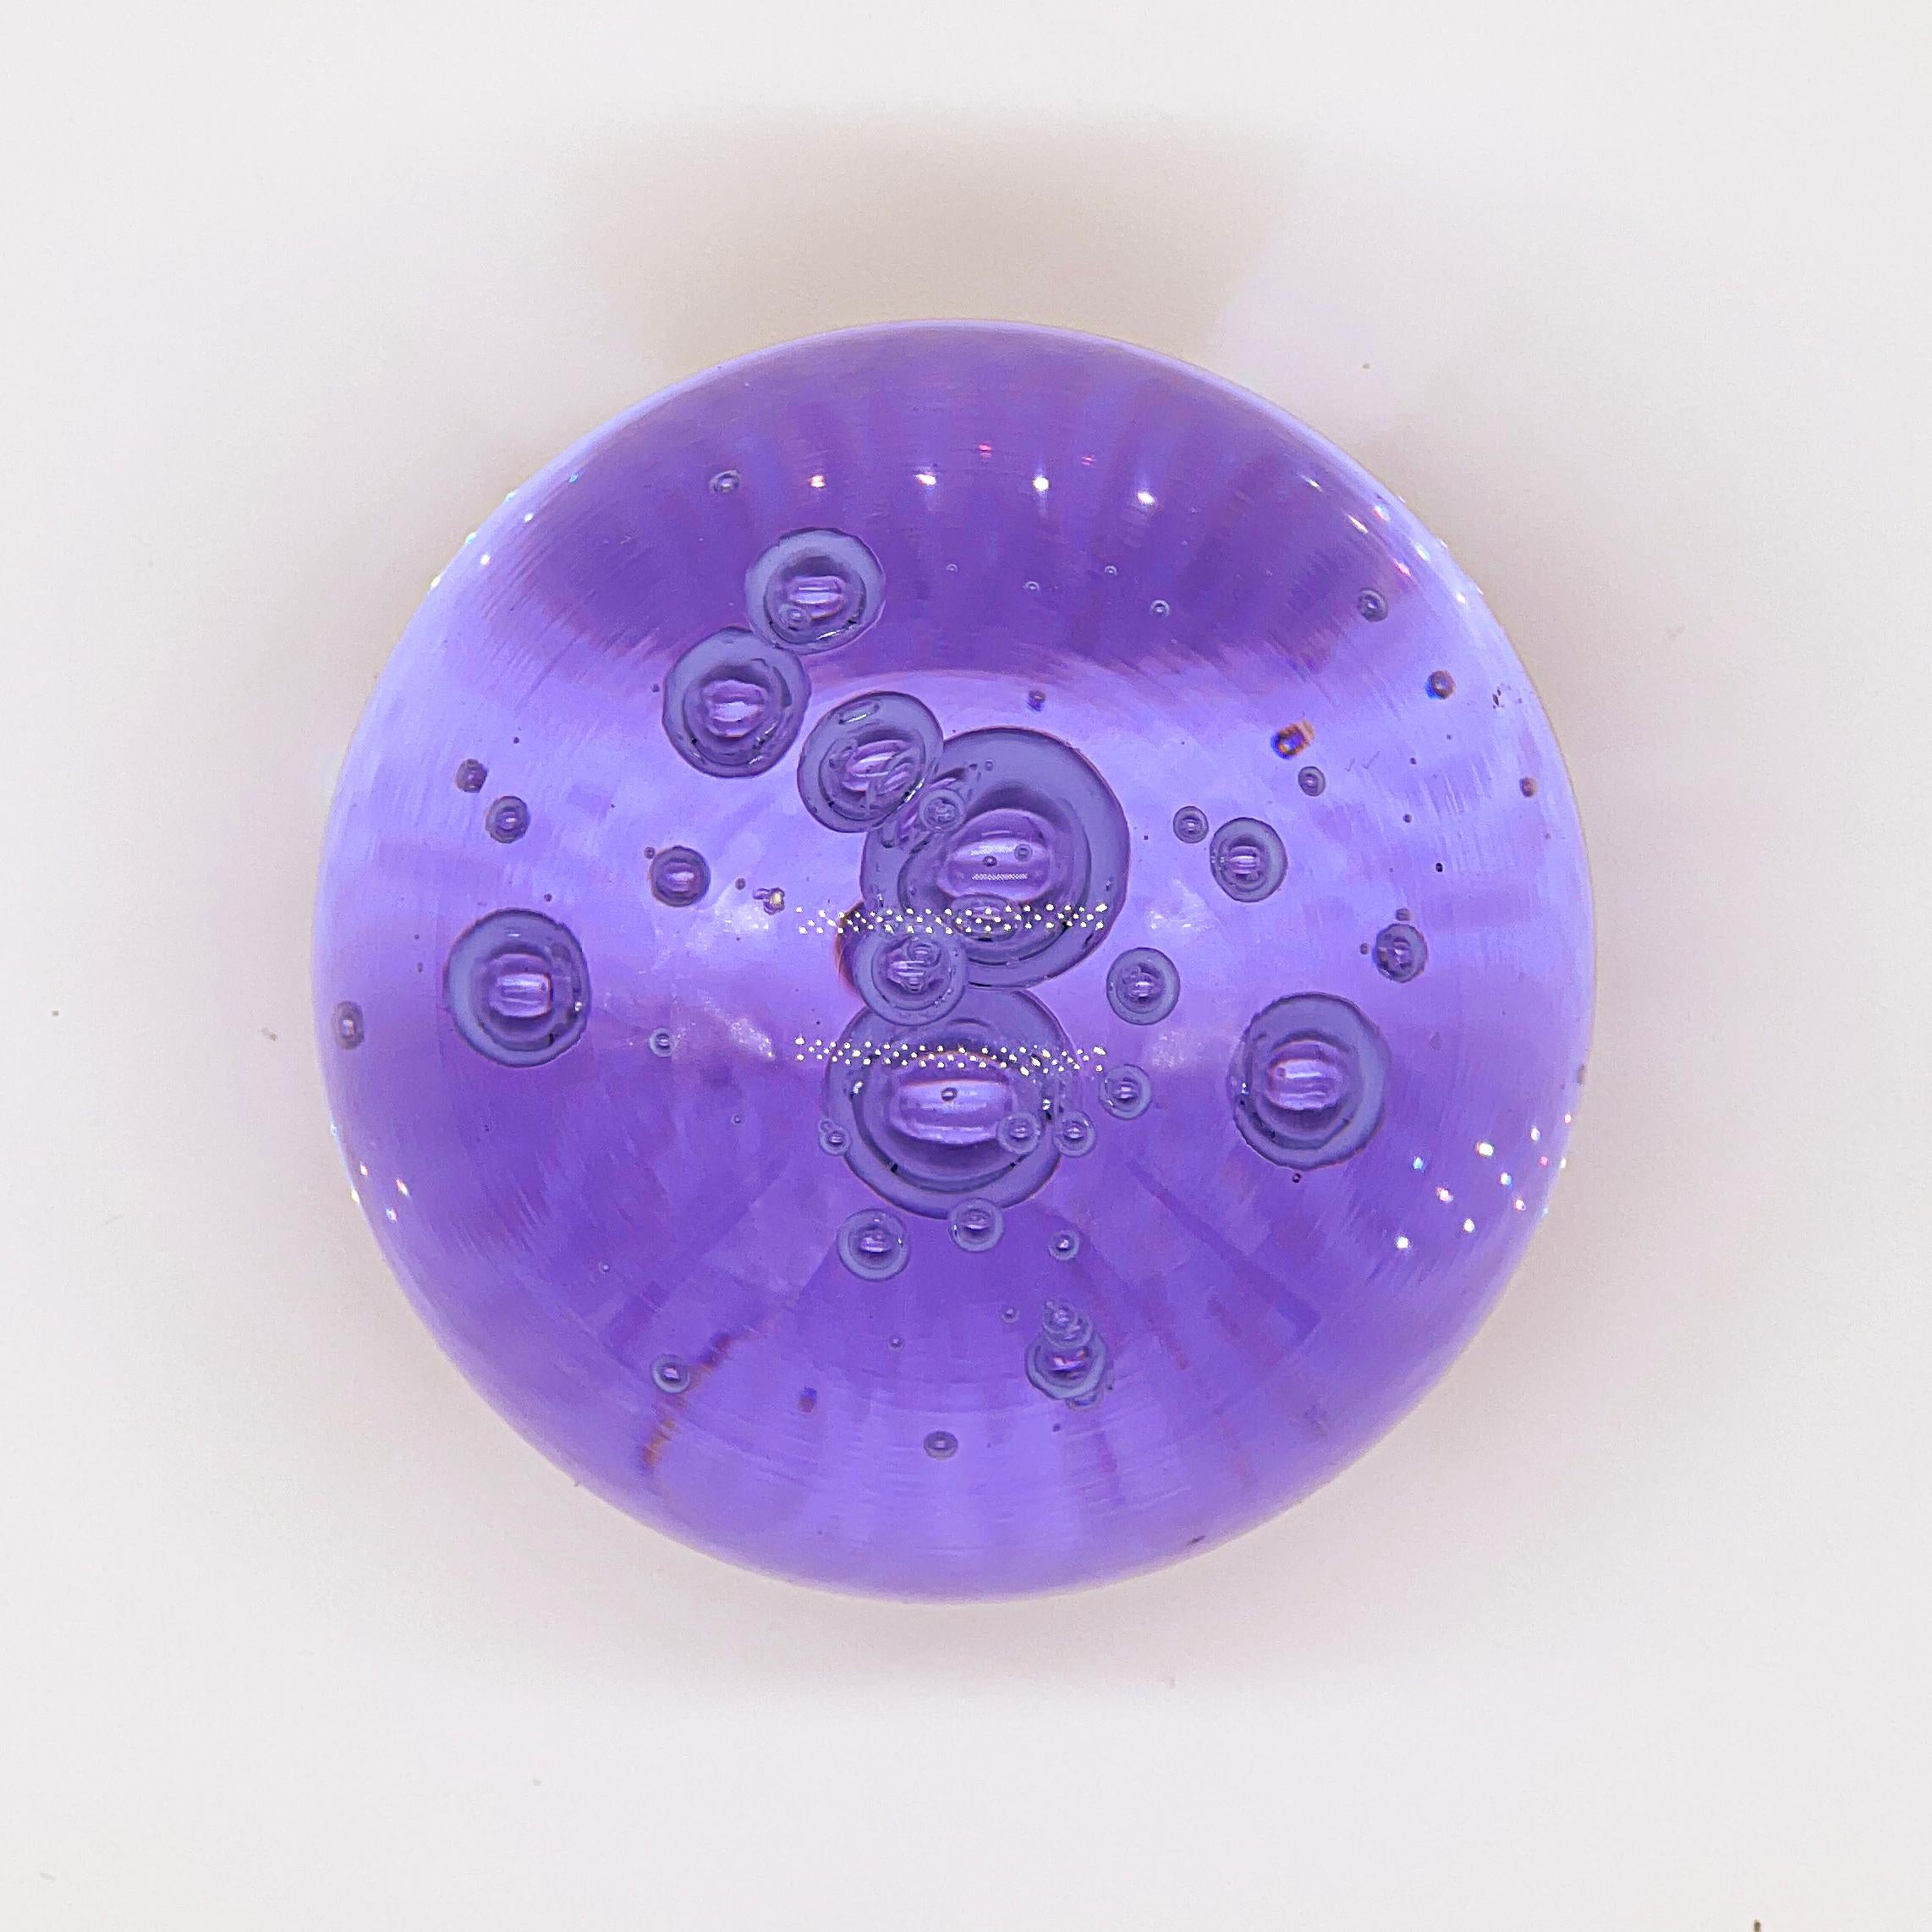 Vintage Murano paperweight in the shape of a sphere with a flat bottom to make it stand still. Made in a deep, vibrant hue of purple glass, it has included bubbles that confer it depth and volume. It is a really attractive object that generates a